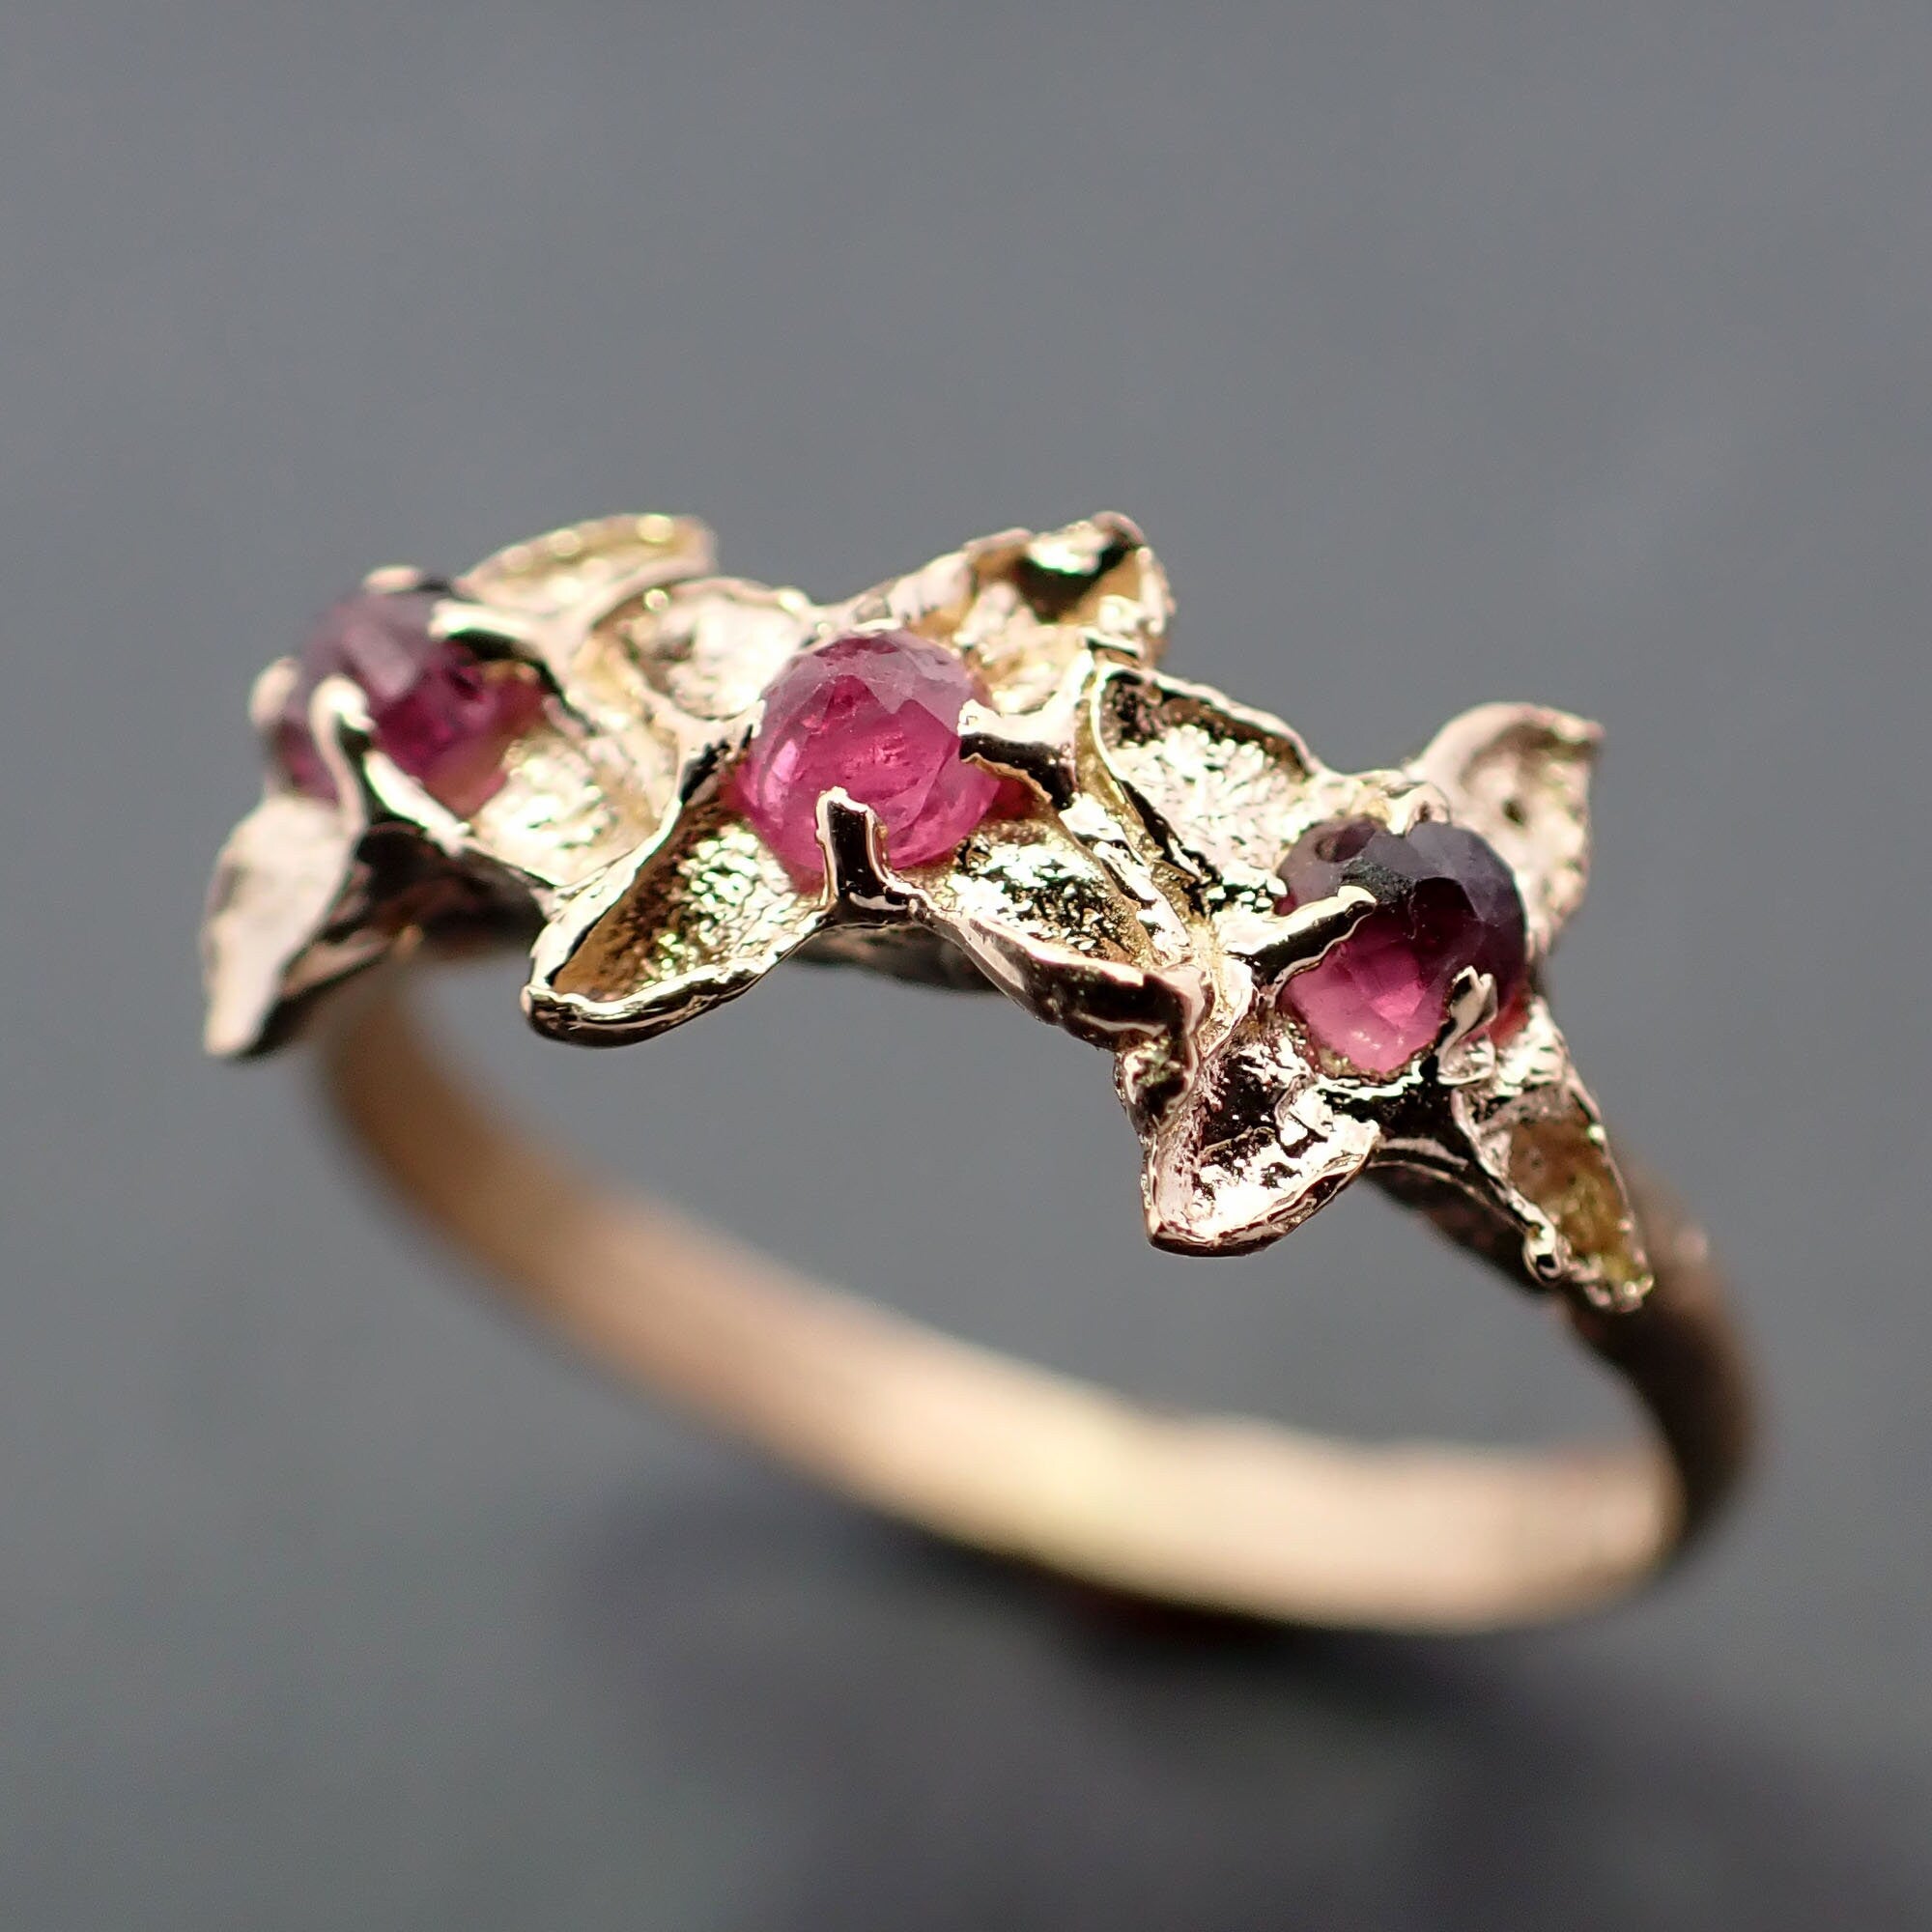 Real Lilac Flower casting with faceted Rubies 14k Yellow gold multi stone Enchanted Garden Floral Ring byAngeline 3375